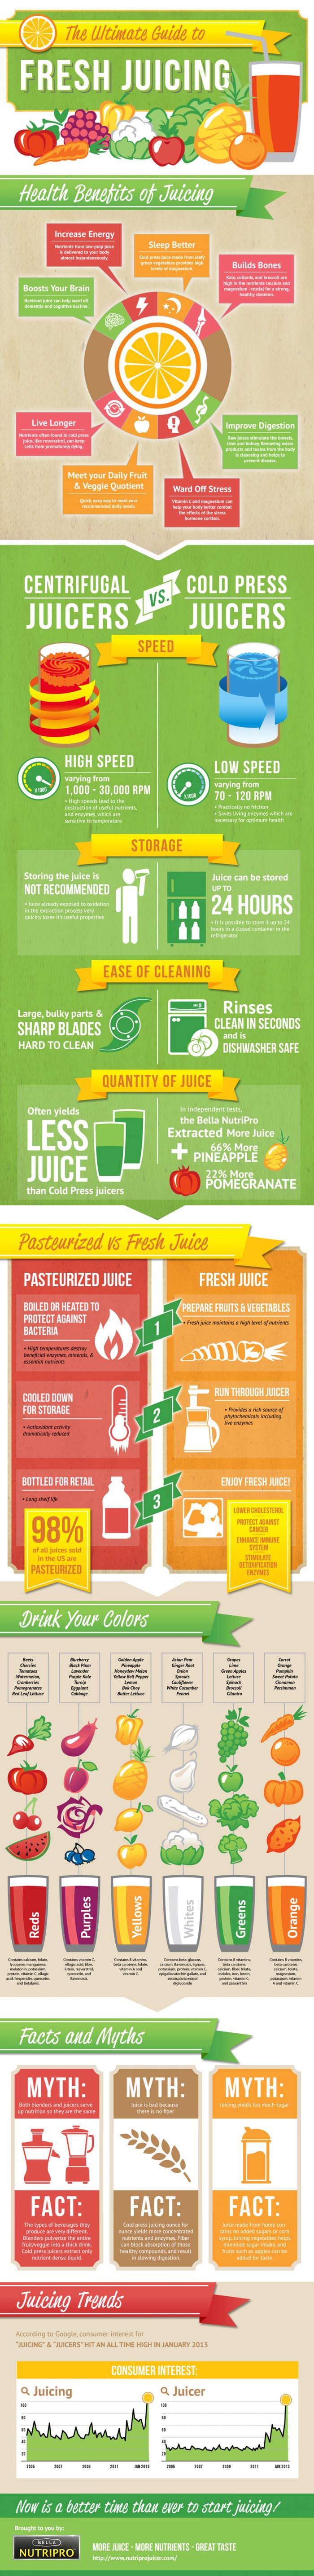 The Ultimate Guide to Fresh Juicing Infographic